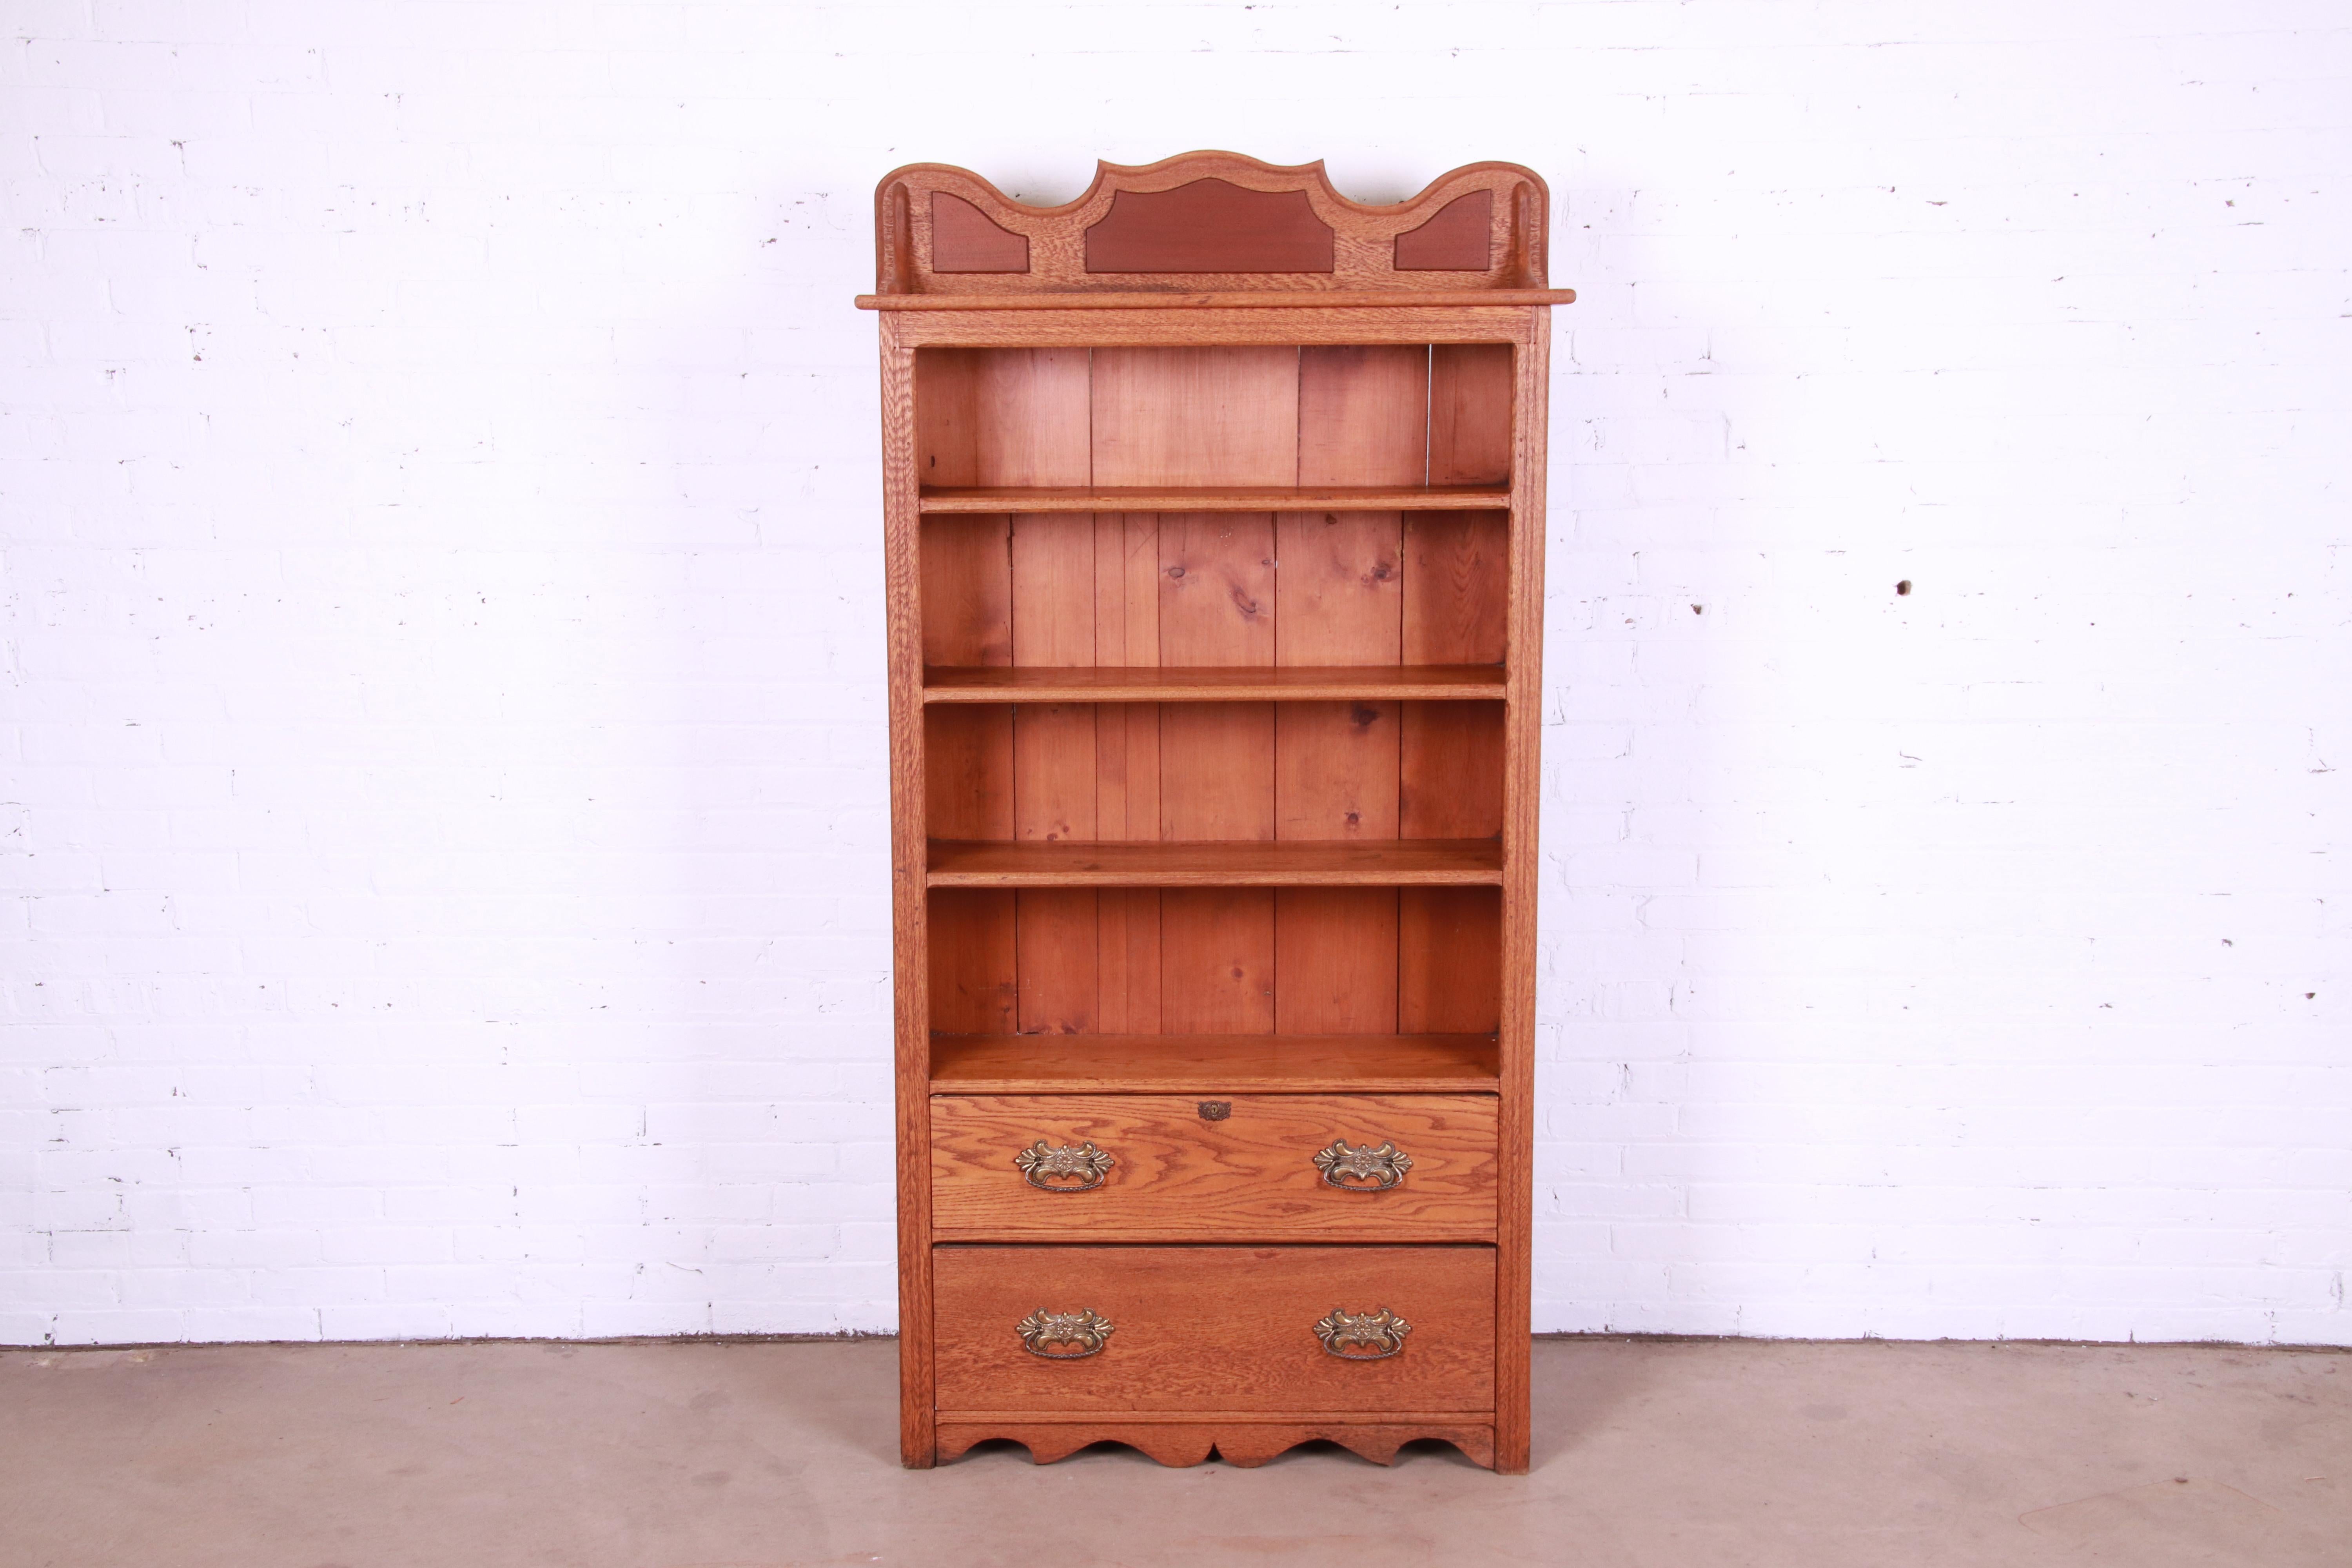 A gorgeous antique Victorian or Arts & Crafts open bookcase with drawers

USA, Circa 1900

Carved solid oak, with original brass hardware.

Measures: 38.5